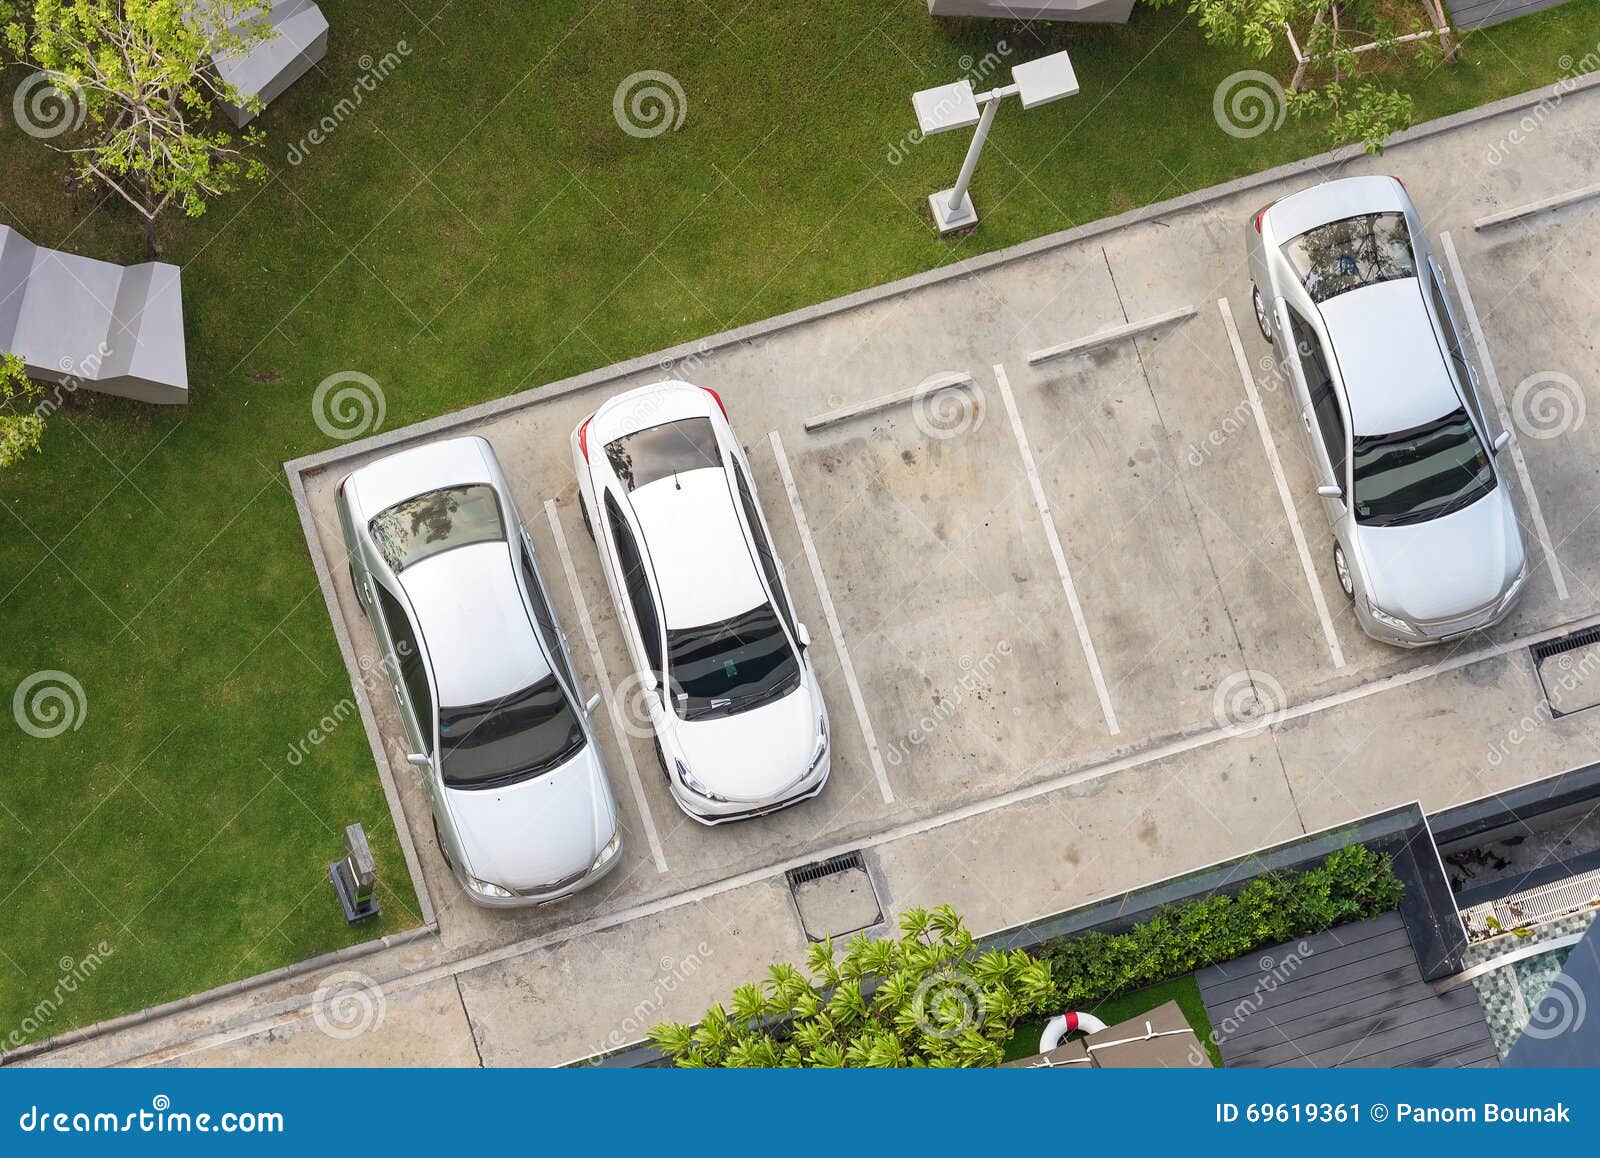 Top View of Parking Area with Small Garden Stock Image - Image of service,  business: 69619361